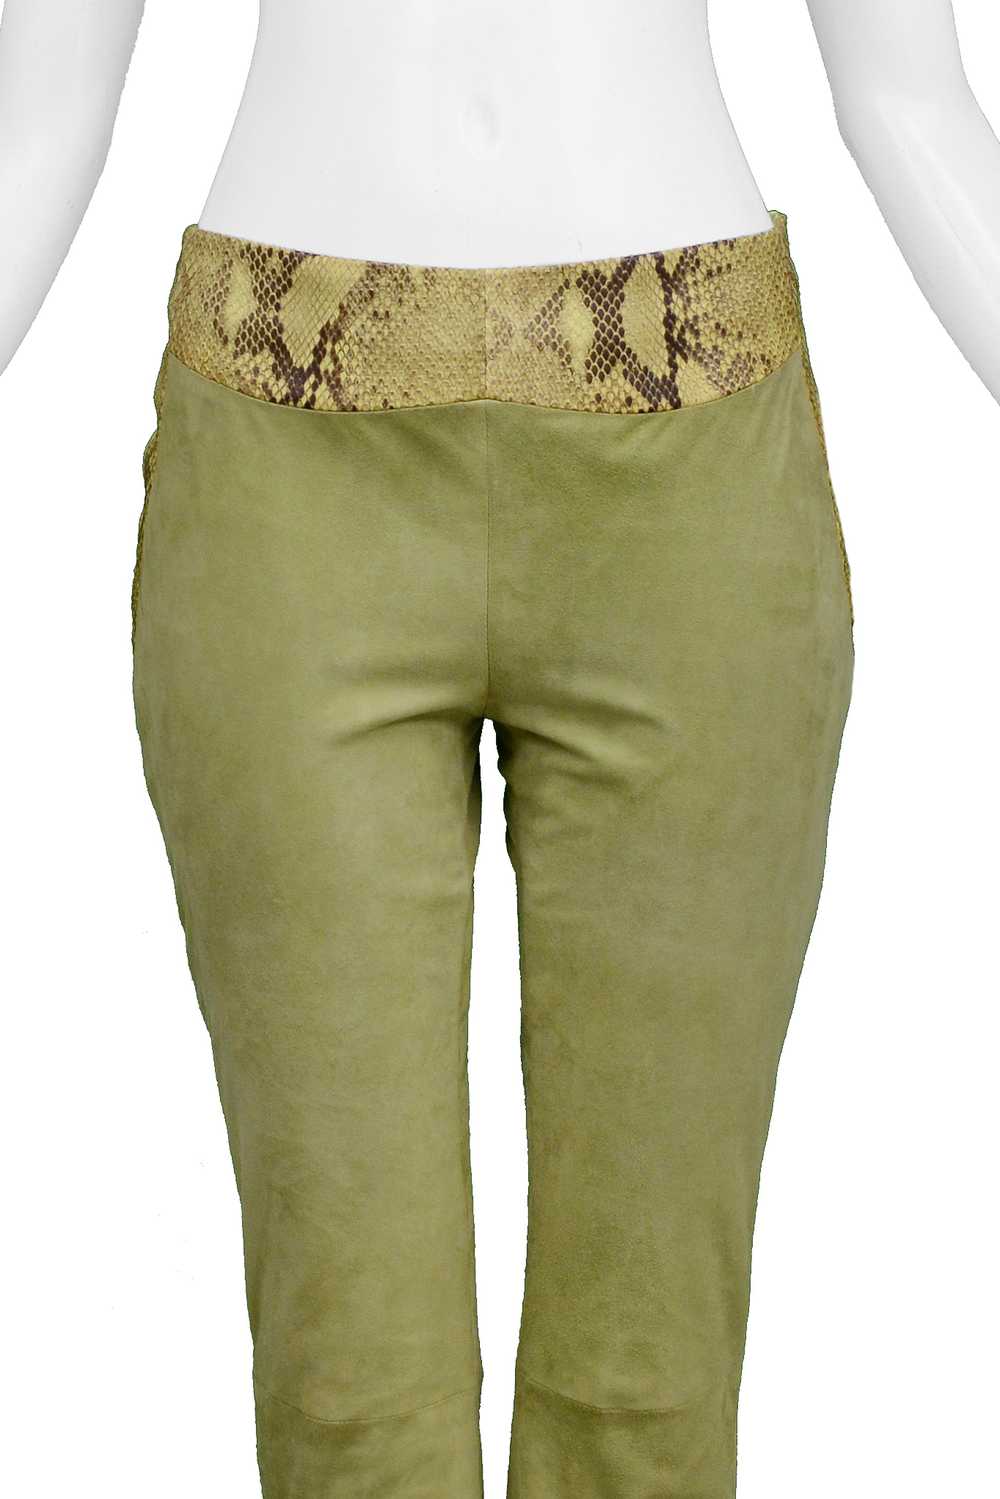 VERSACE GREEN SUEDE & LEATHER PANTS - image 4